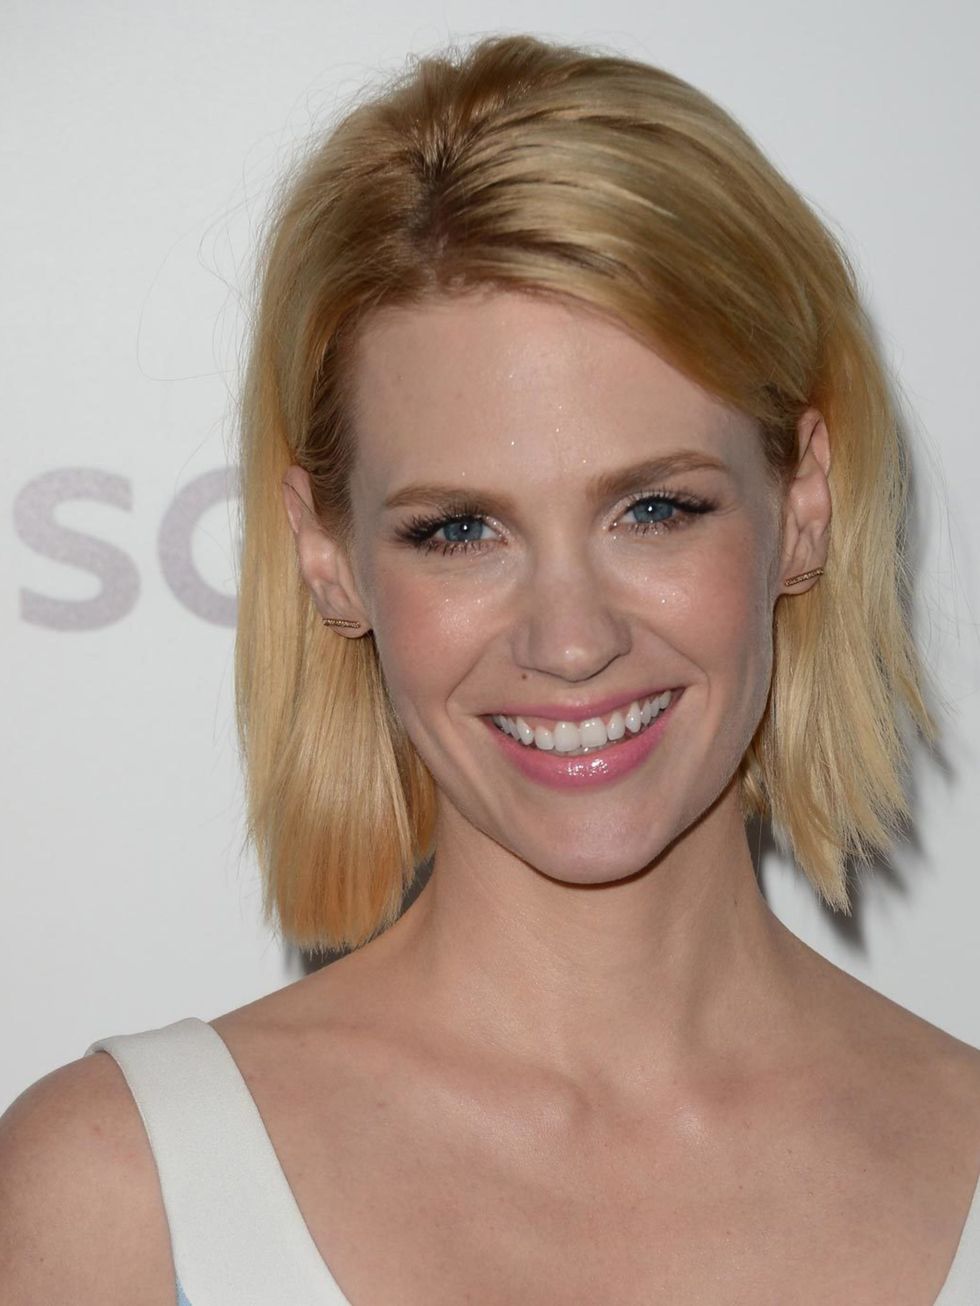 <p><strong><a href="http://www.elleuk.com/star-style/celebrity-style-files/january-jones">January Jones</a></strong></p><p>A feminine, natural beauty look for Spring. January opted for glossy pale pink lips and a light dusting of silver glitter across her